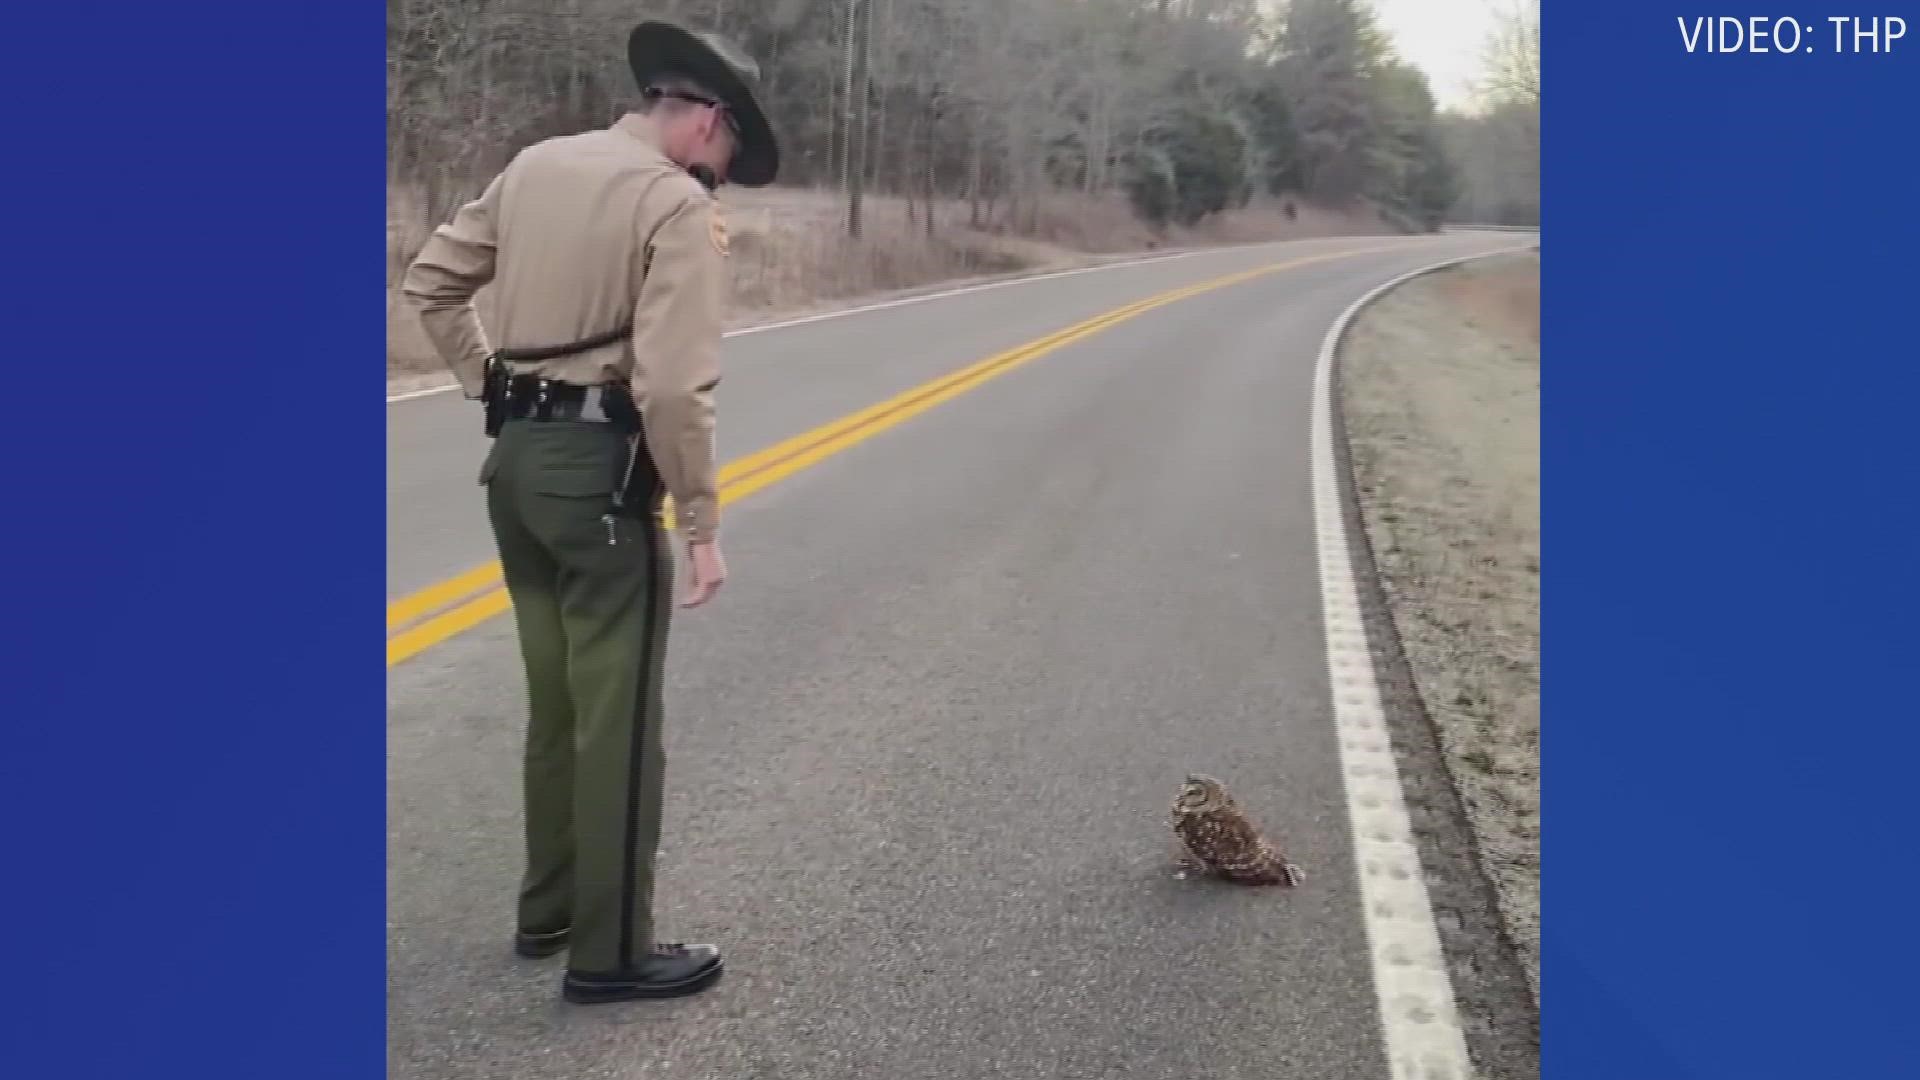 "Mr. Owl was thankful for the Trooper's kindness and guidance as it will keep us all safe."